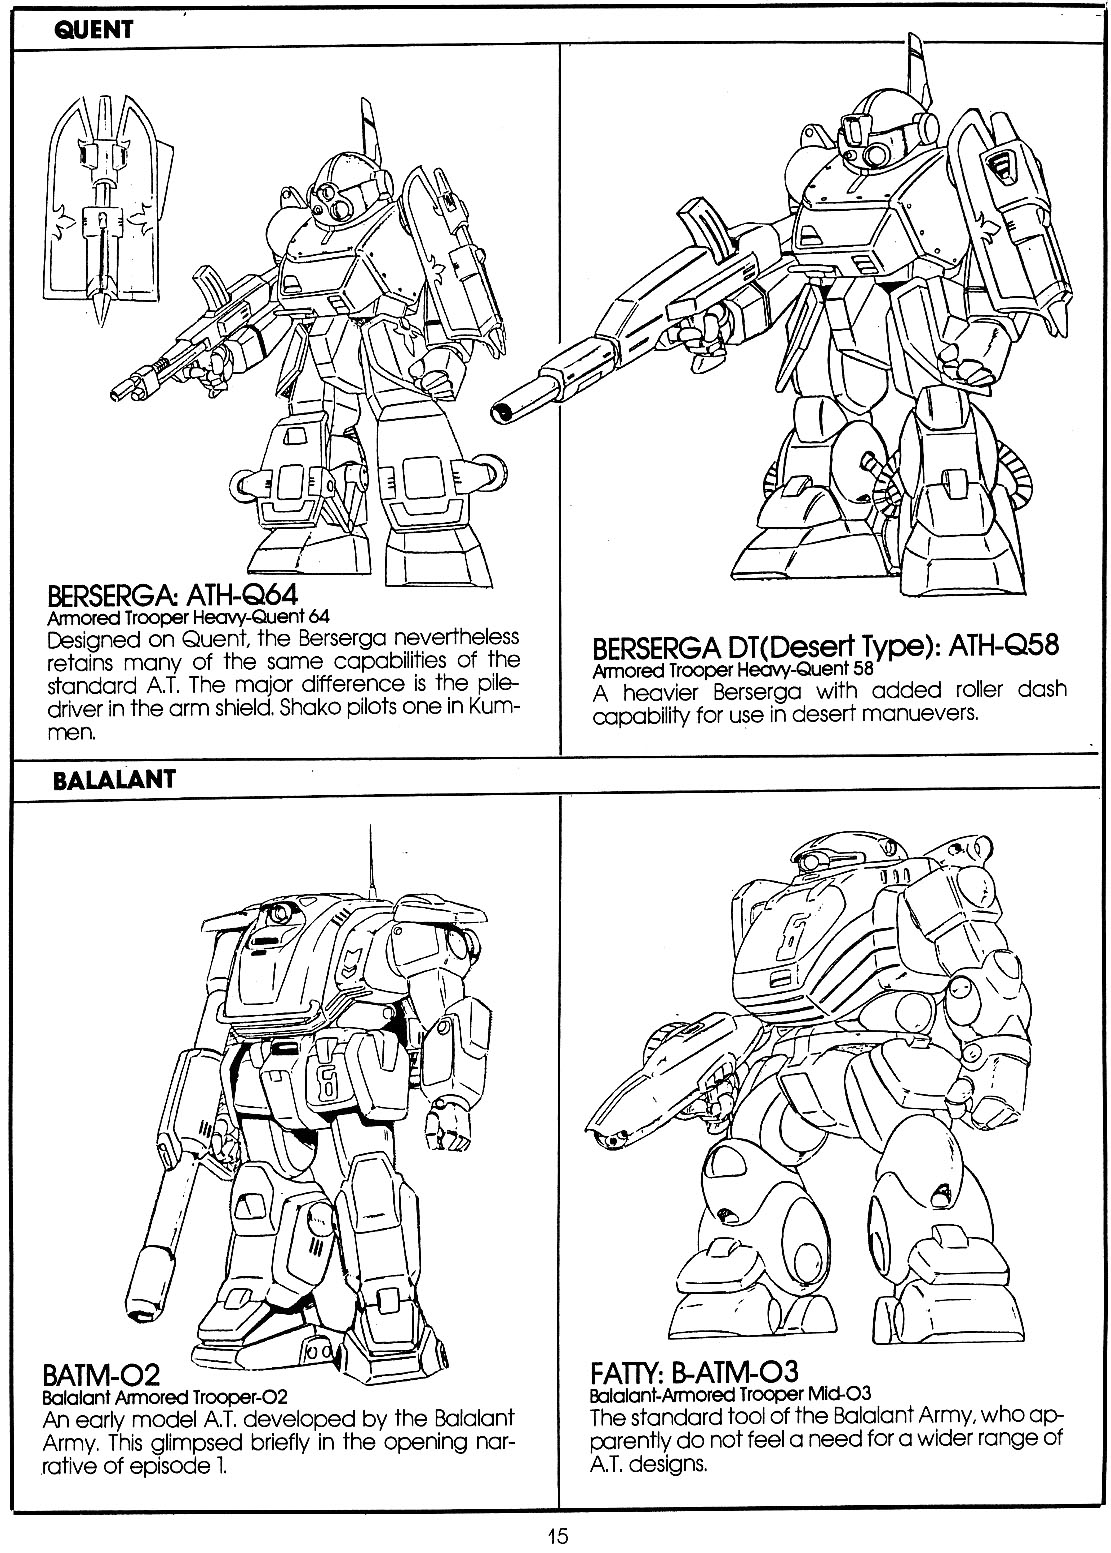 VOTOMS Viewing Guide 16